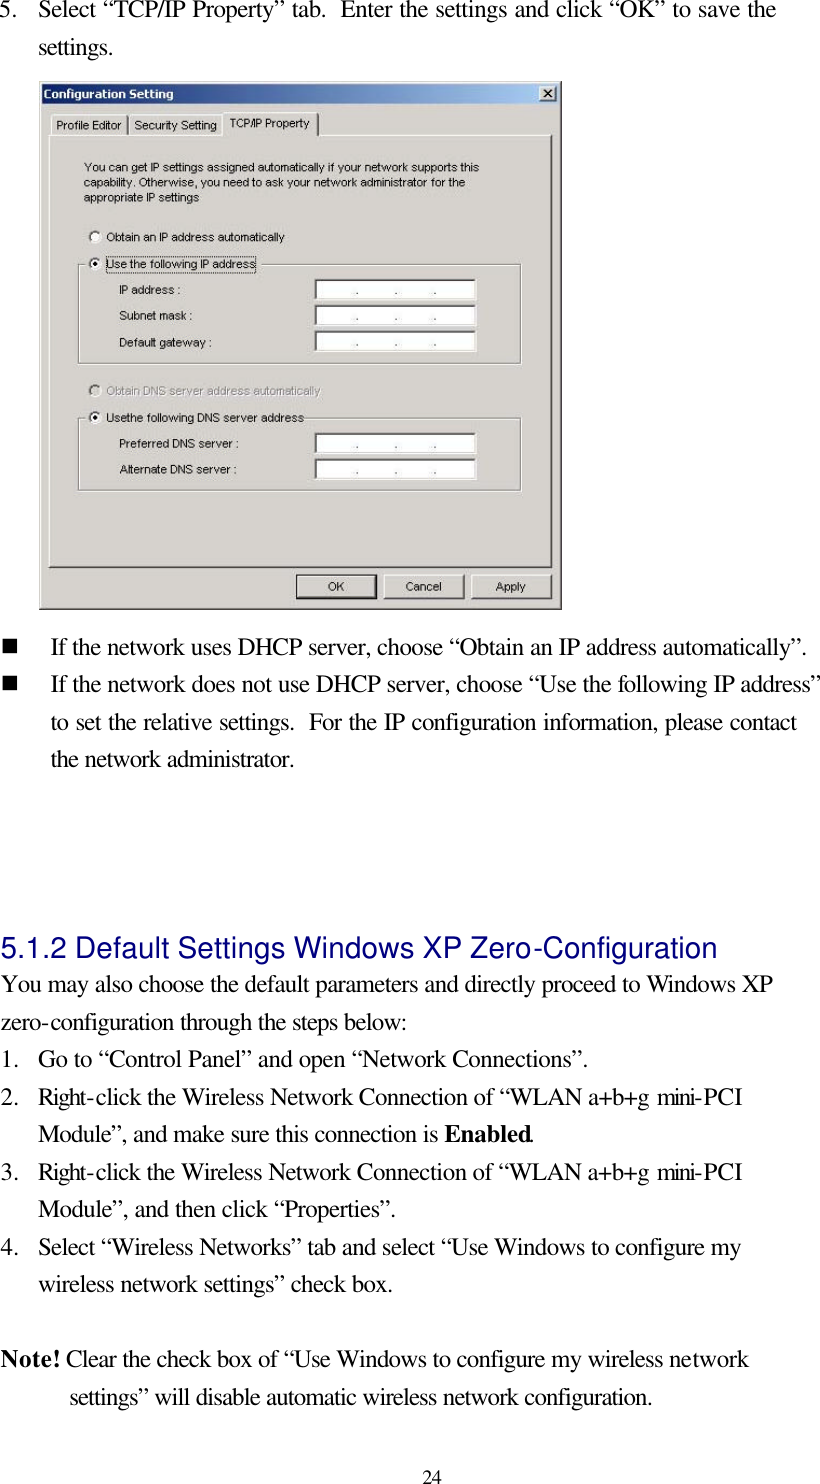  24 5.   Select “TCP/IP Property” tab.  Enter the settings and click “OK” to save the settings.  n If the network uses DHCP server, choose “Obtain an IP address automatically”. n If the network does not use DHCP server, choose “Use the following IP address” to set the relative settings.  For the IP configuration information, please contact the network administrator.   5.1.2 Default Settings Windows XP Zero-Configuration   You may also choose the default parameters and directly proceed to Windows XP zero-configuration through the steps below: 1.  Go to “Control Panel” and open “Network Connections”. 2.  Right-click the Wireless Network Connection of “WLAN a+b+g mini-PCI Module”, and make sure this connection is Enabled. 3.  Right-click the Wireless Network Connection of “WLAN a+b+g mini-PCI Module”, and then click “Properties”. 4.  Select “Wireless Networks” tab and select “Use Windows to configure my wireless network settings” check box.  Note! Clear the check box of “Use Windows to configure my wireless network settings” will disable automatic wireless network configuration. 